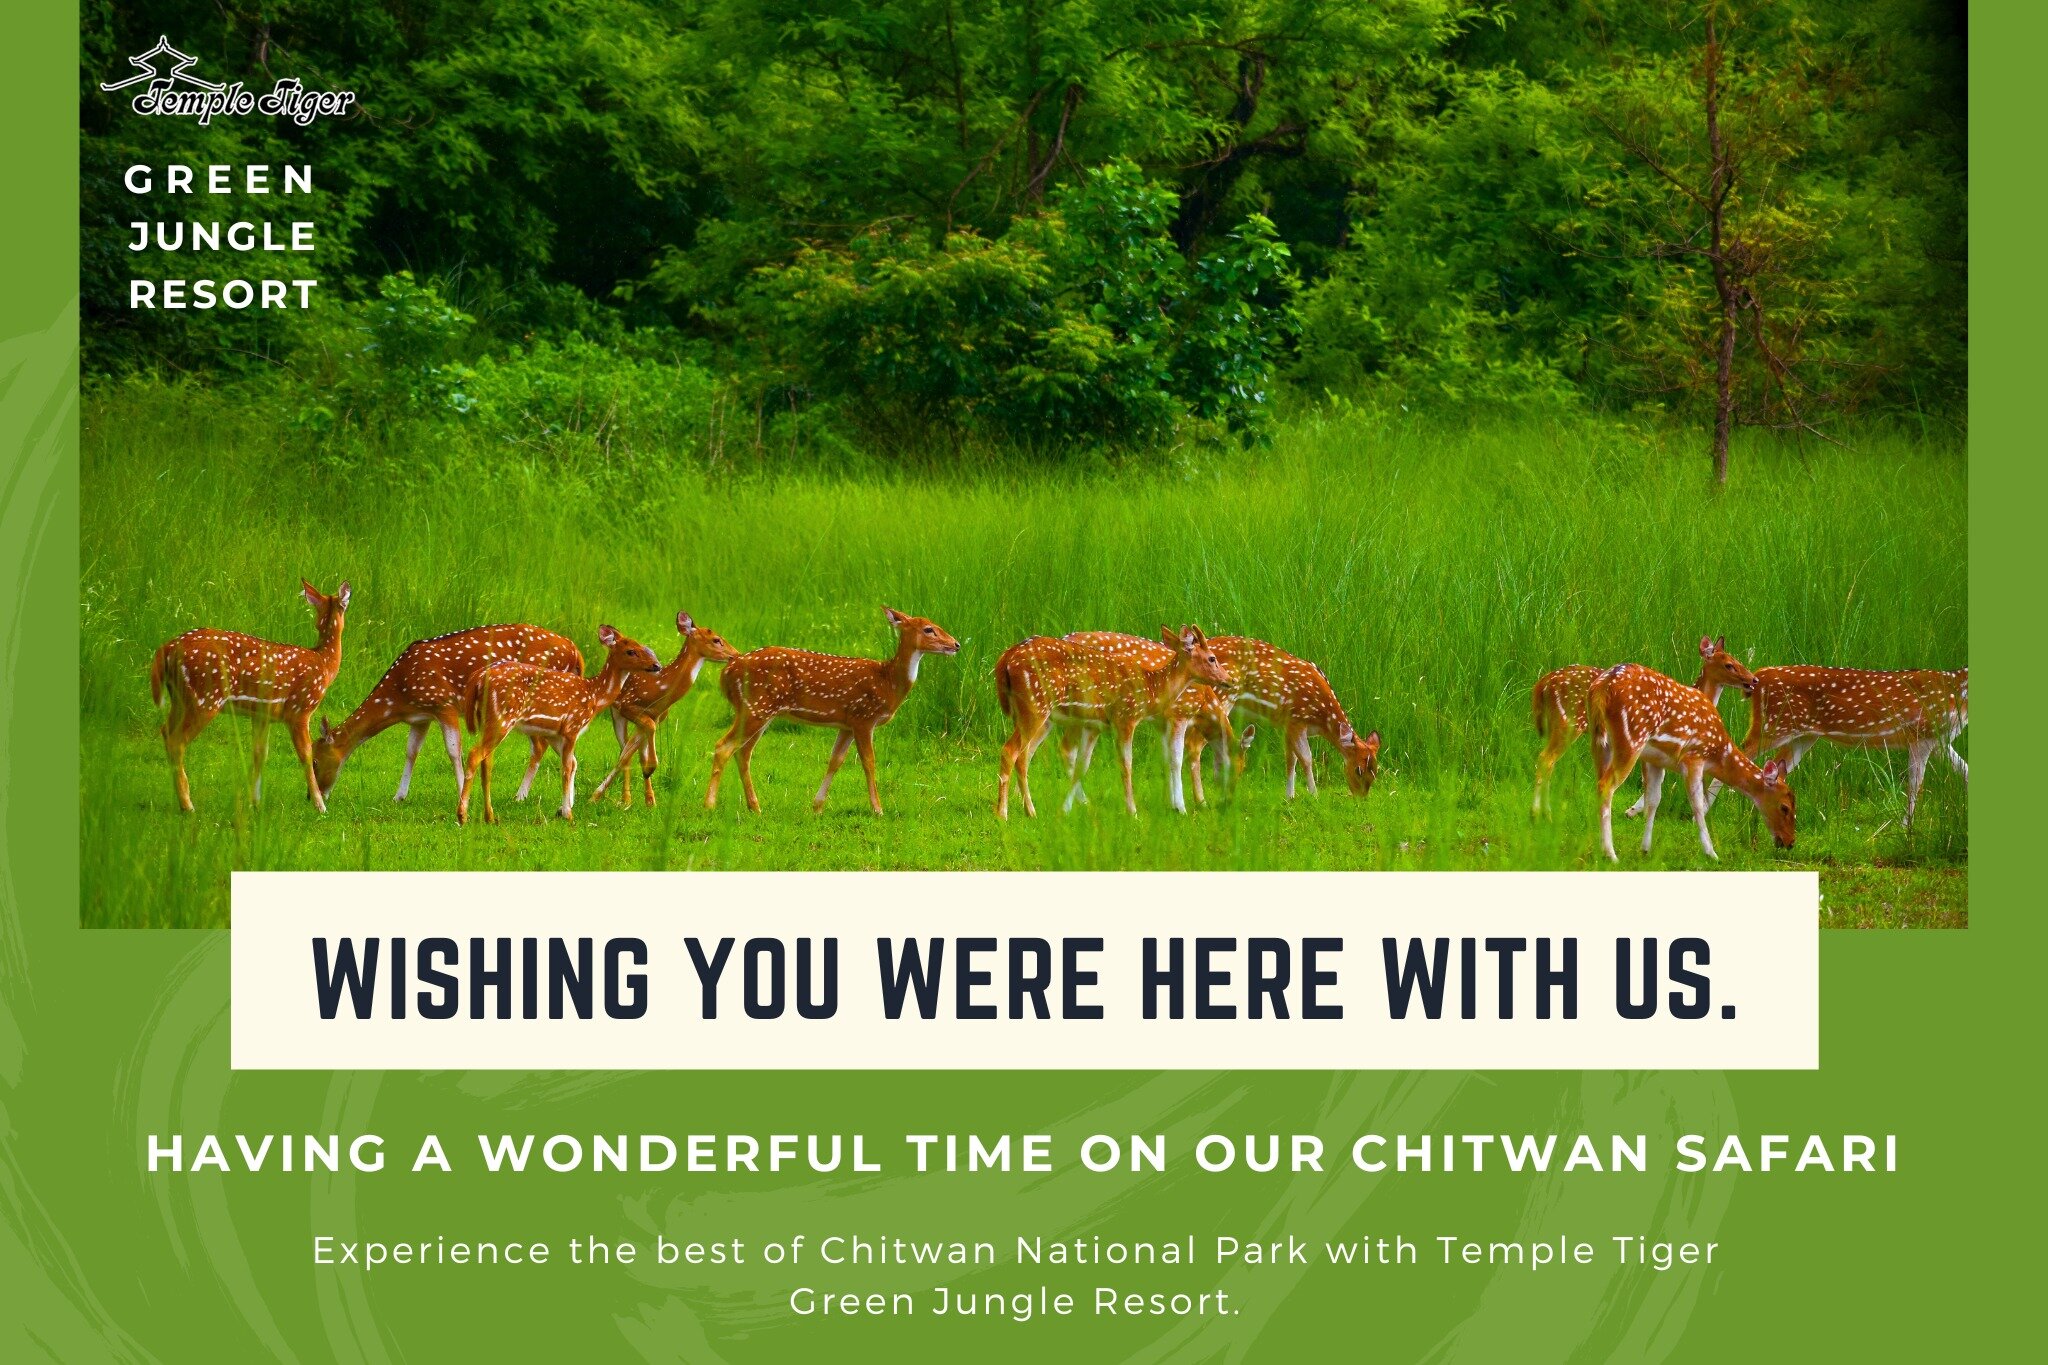 🌿🦌 Embrace the wild at Temple Tiger Green Jungle Resort! 🦌🌿

📸 Check out this mesmerizing shot from our Chitwan National Park safari, where a majestic group of Spotted Deers graced us with their presence. 

&quot;Having a wonderful time on our C